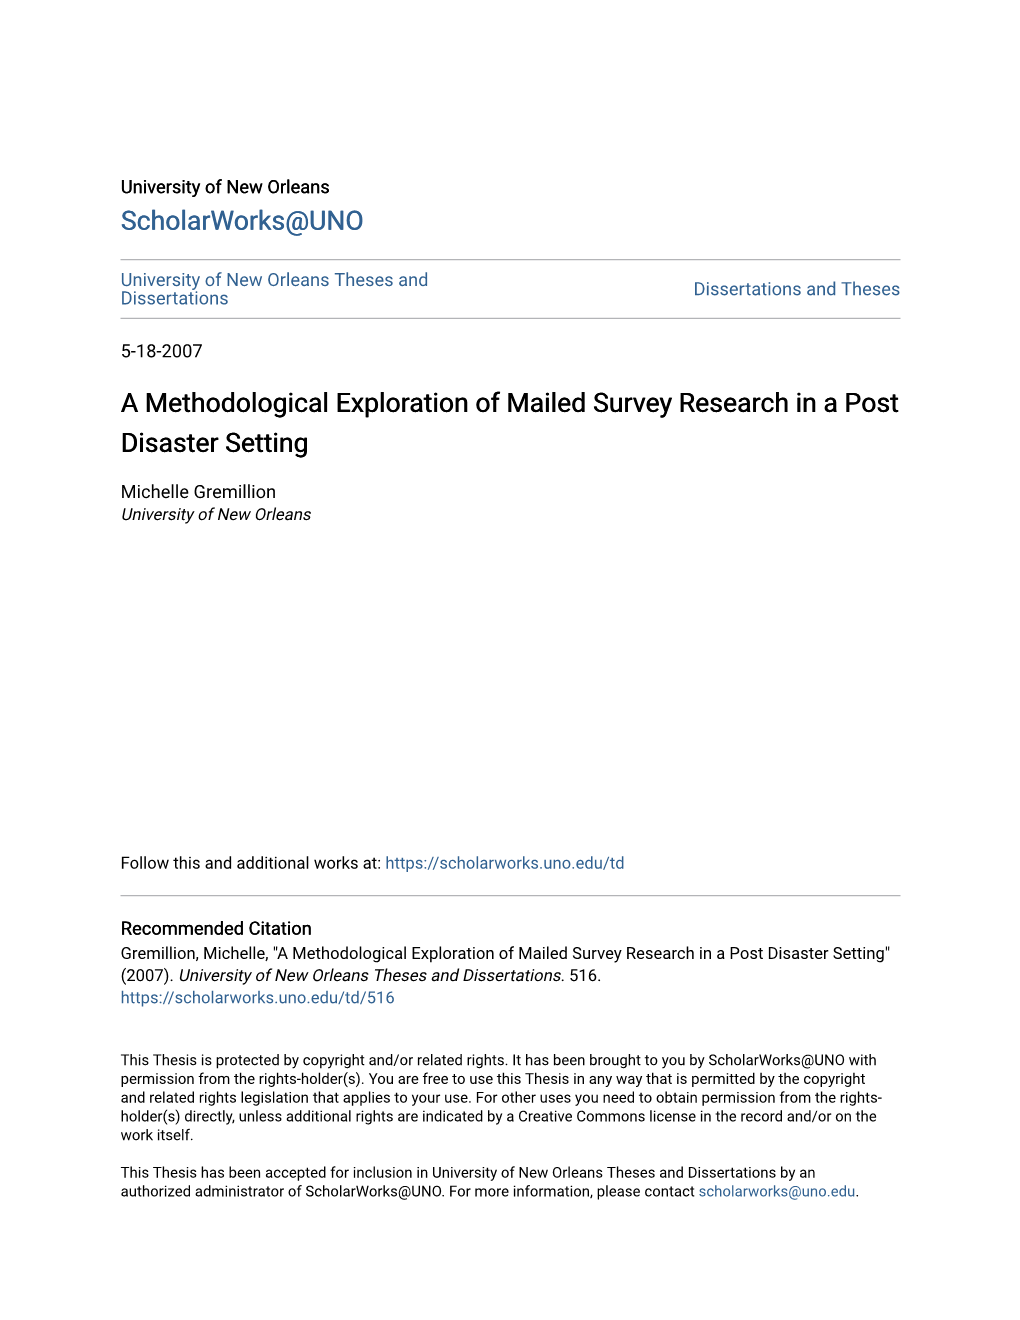 A Methodological Exploration of Mailed Survey Research in a Post Disaster Setting